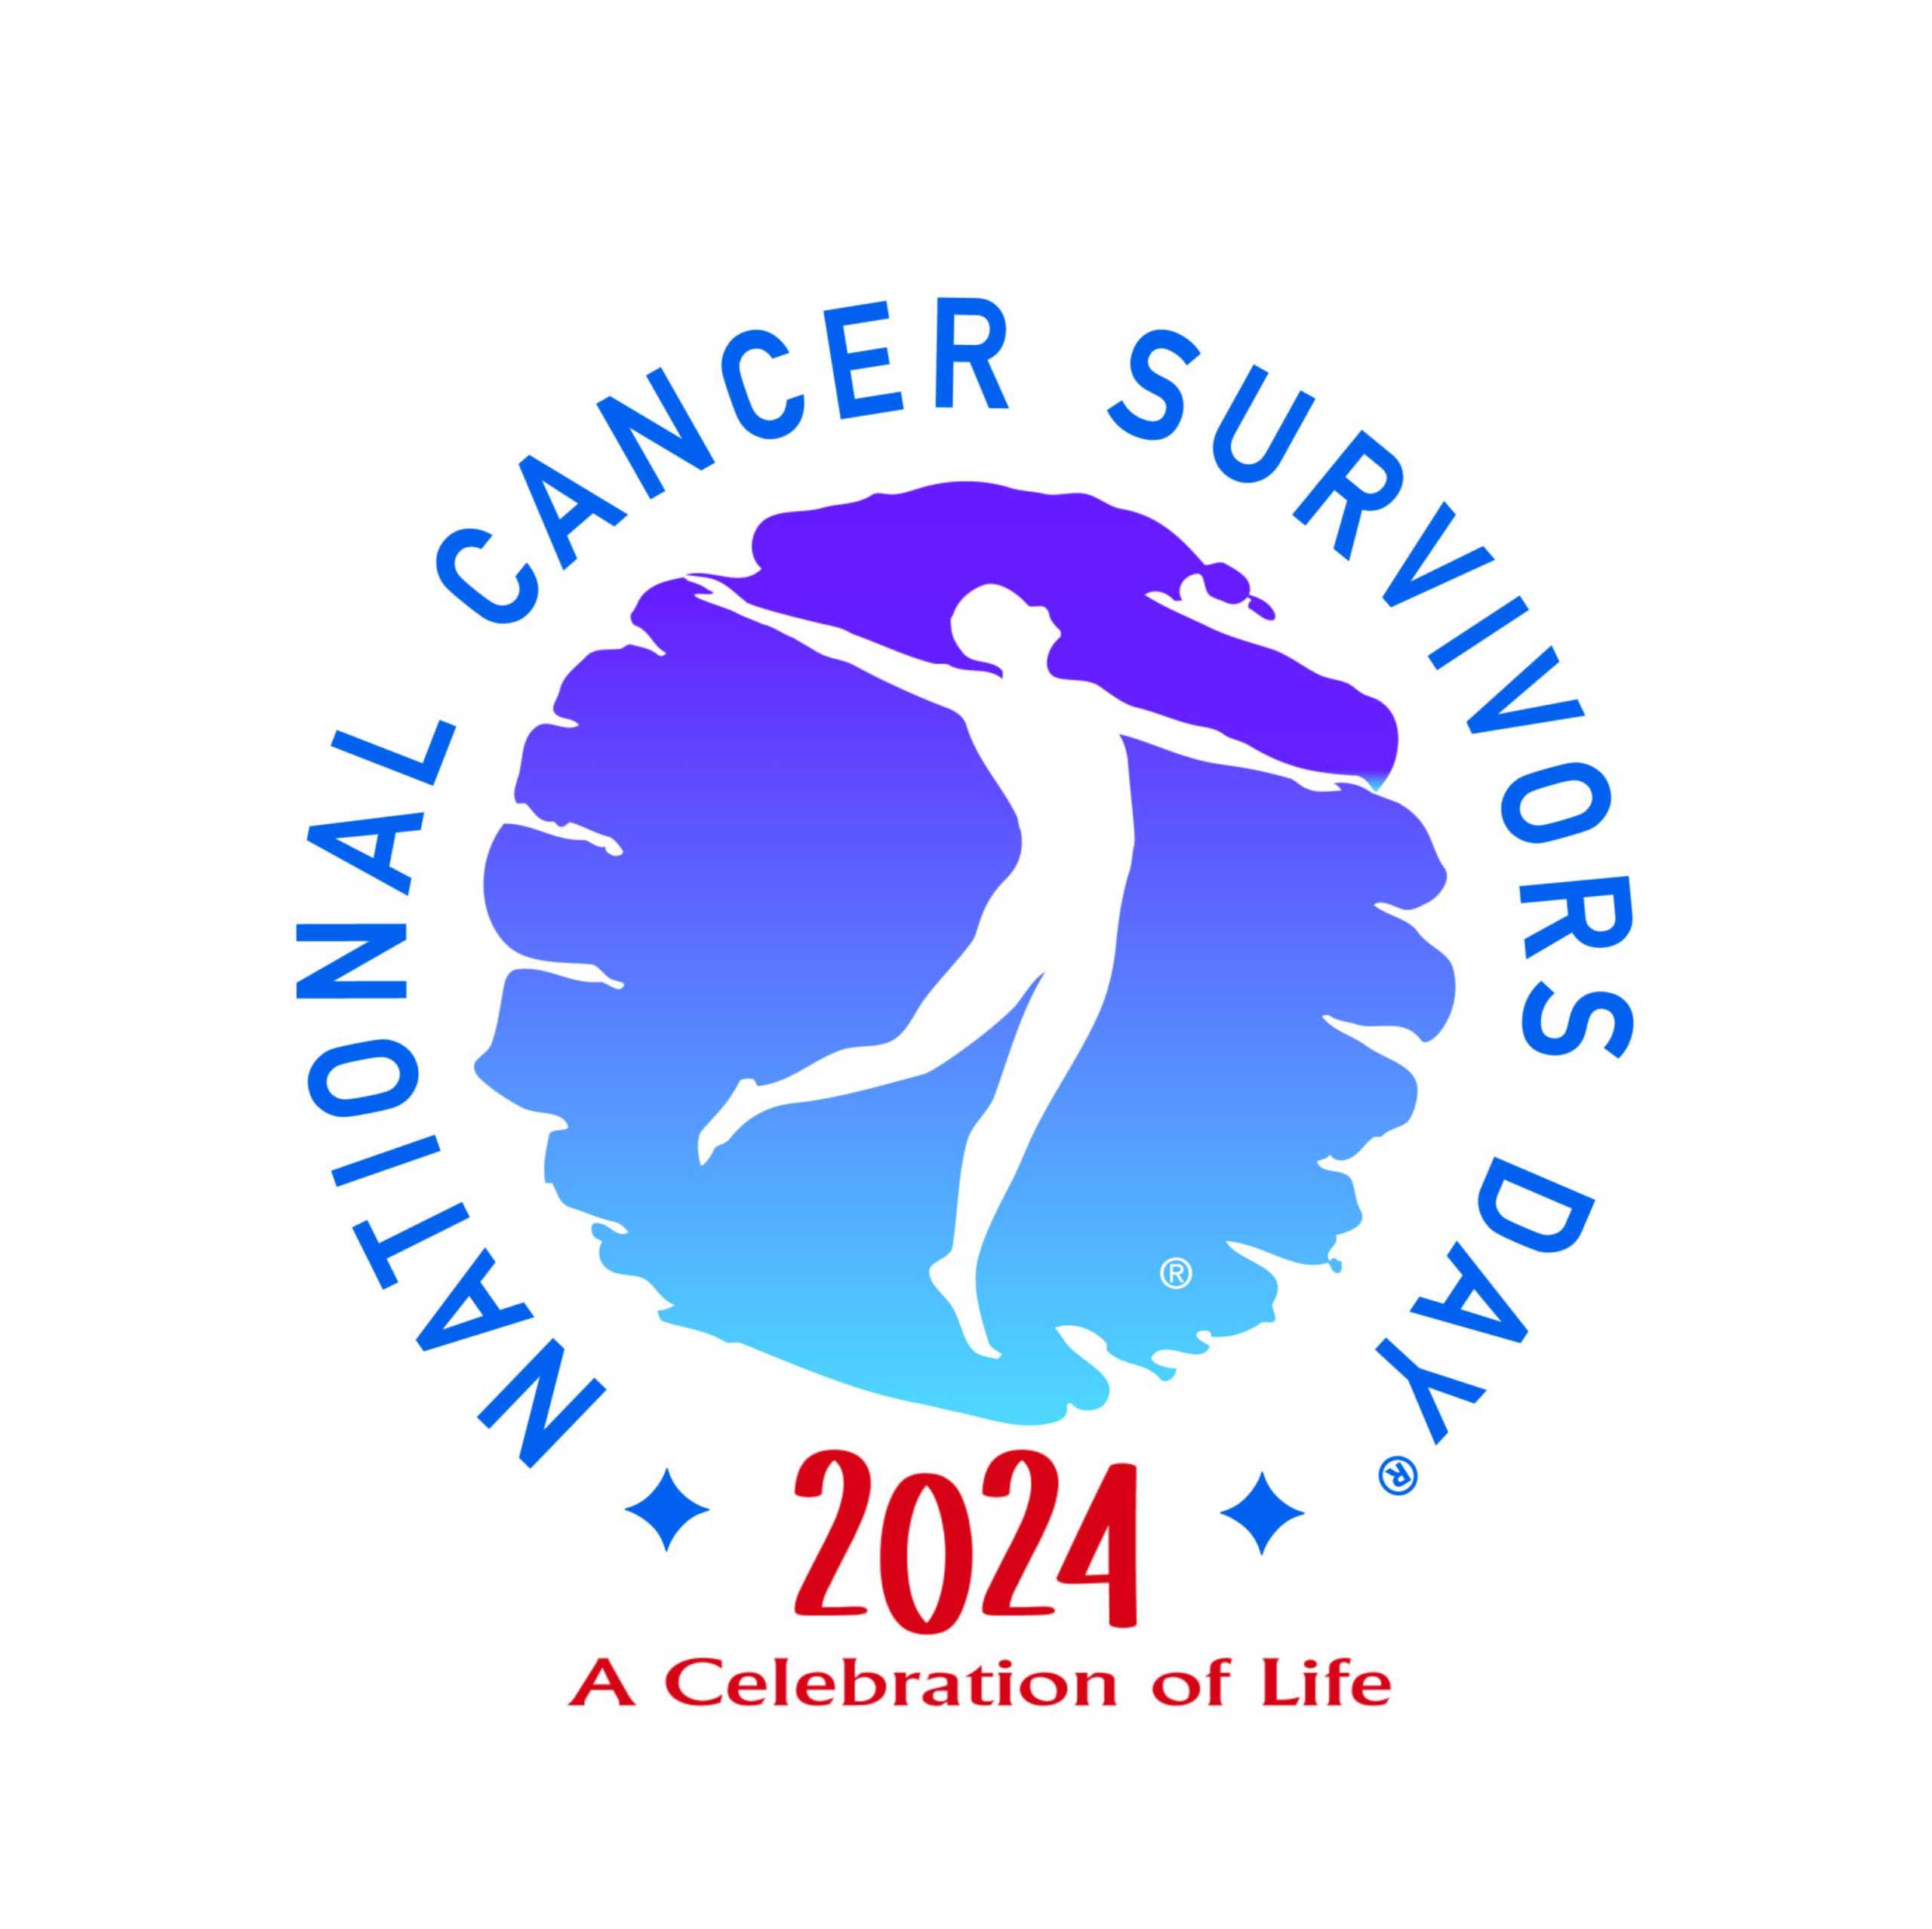 Cancer Survivors Gather Across the Globe to Celebrate Life, Raise Awareness on National Cancer Survivors Day